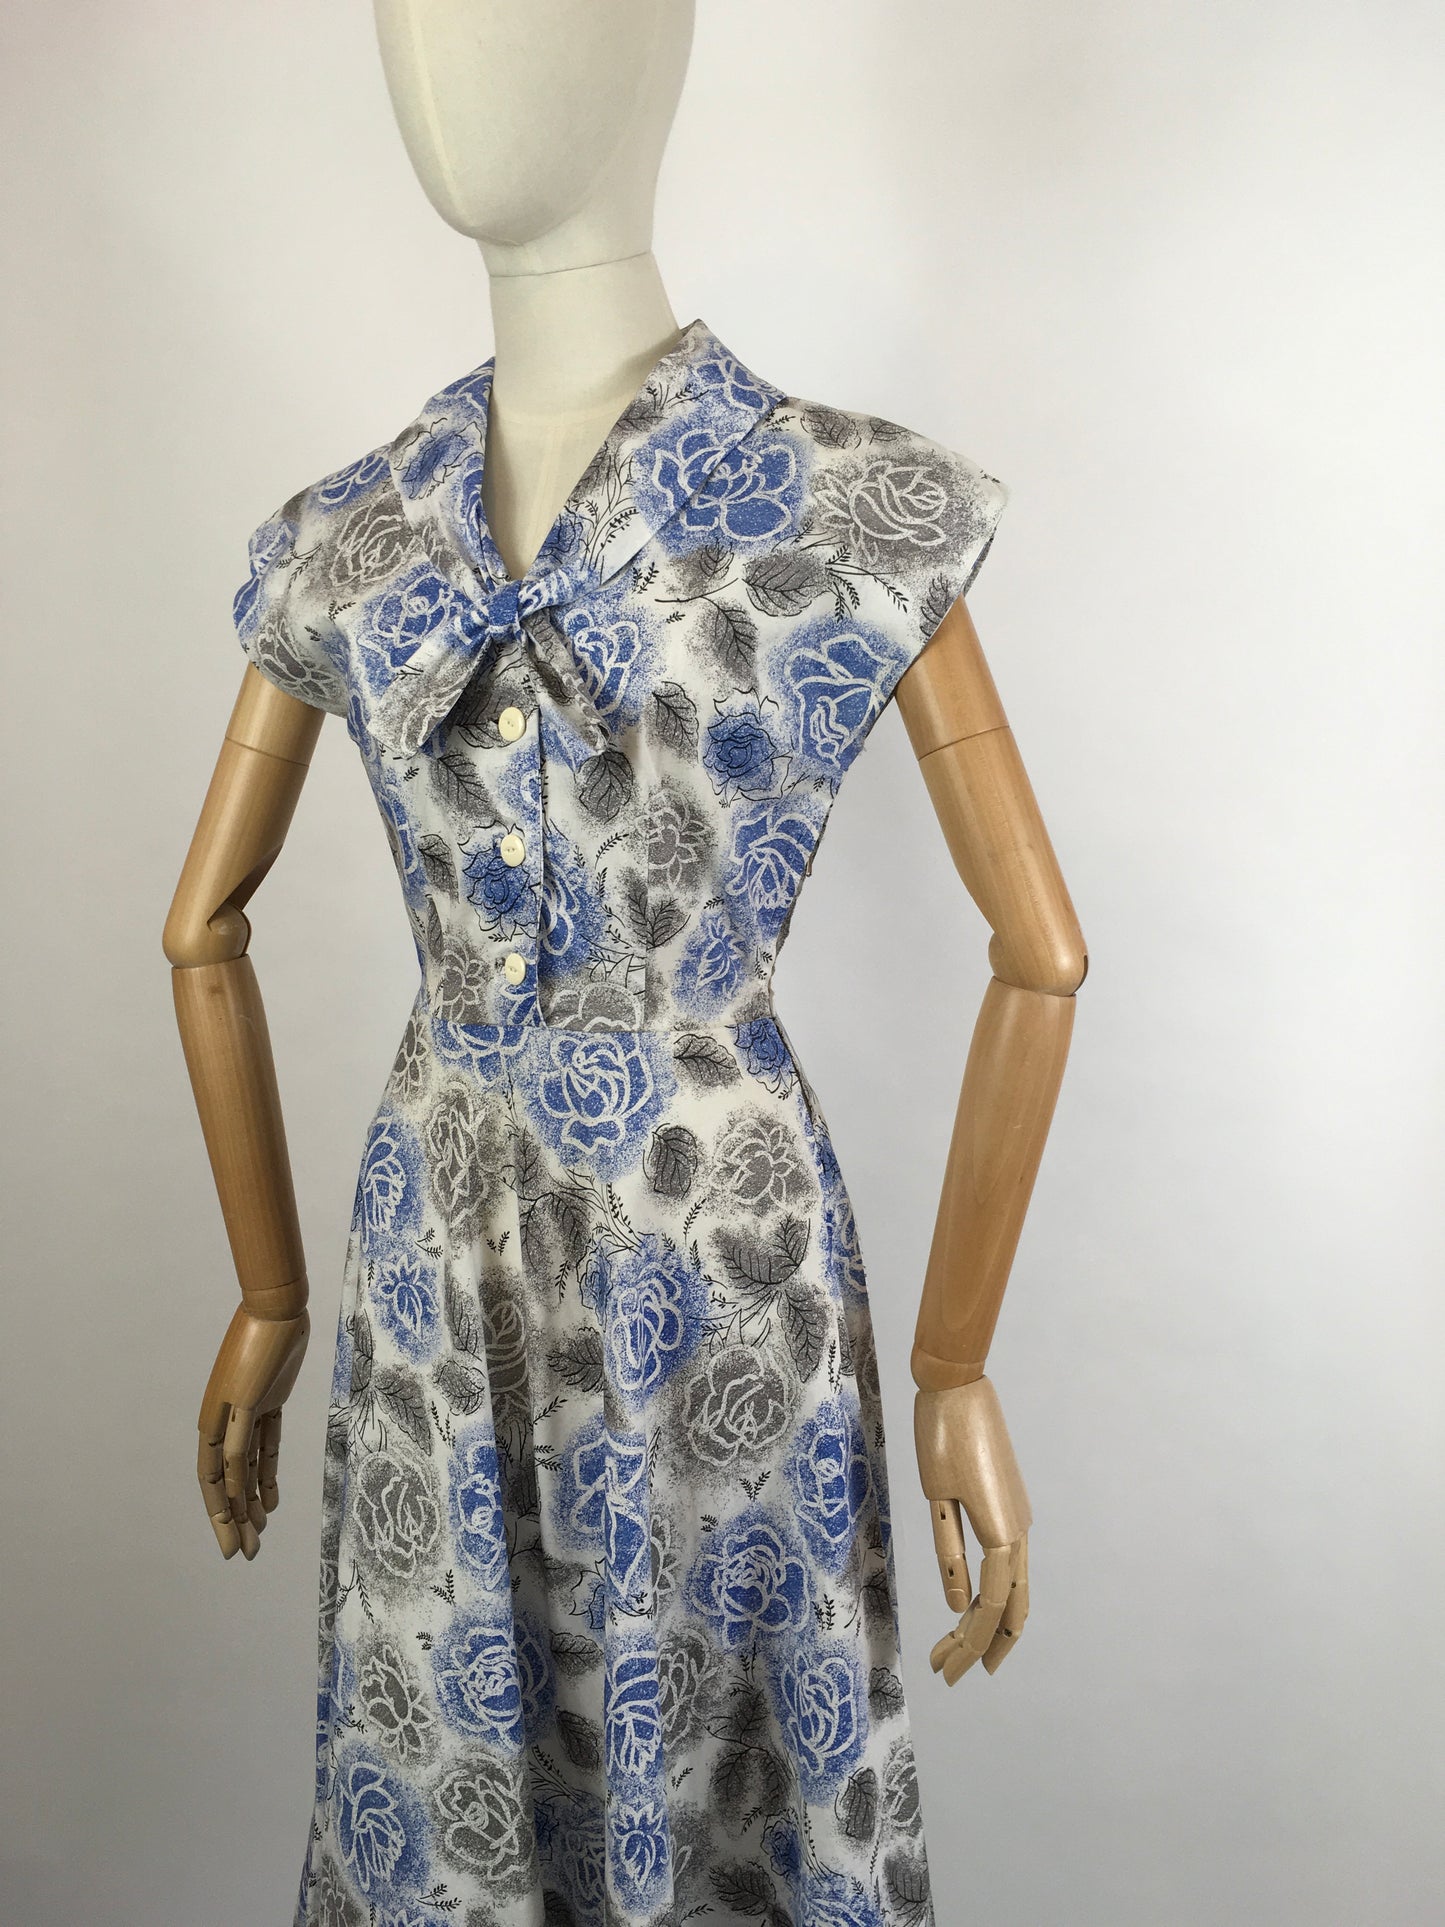 Original late 1940s Floral Dress - In A Crisp Cotton in Soft Greys, Charcoals and Blues